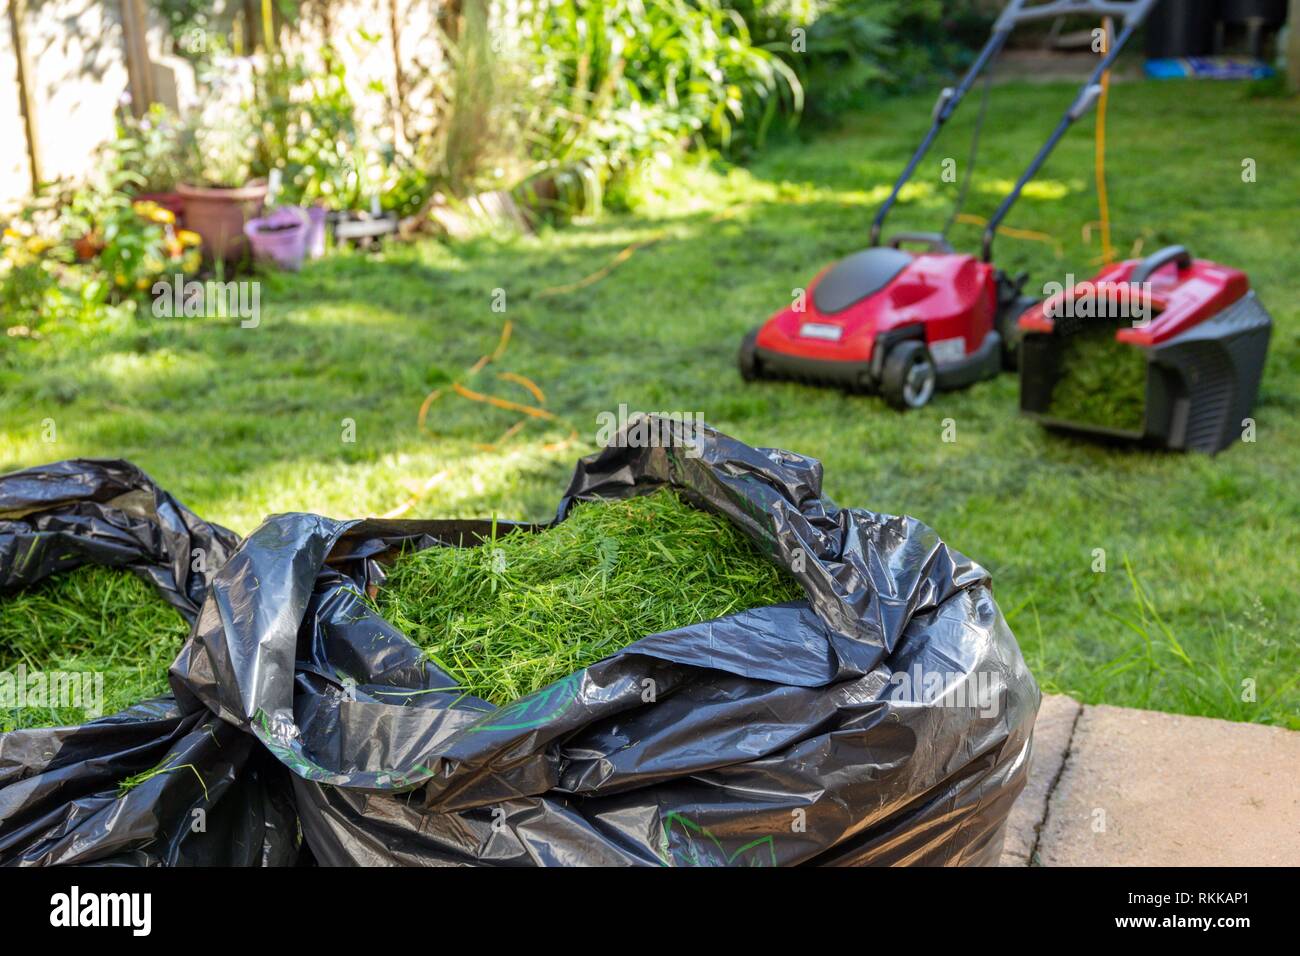 Mowing a household garden lawn with black bag of grass clippings. Stock Photo